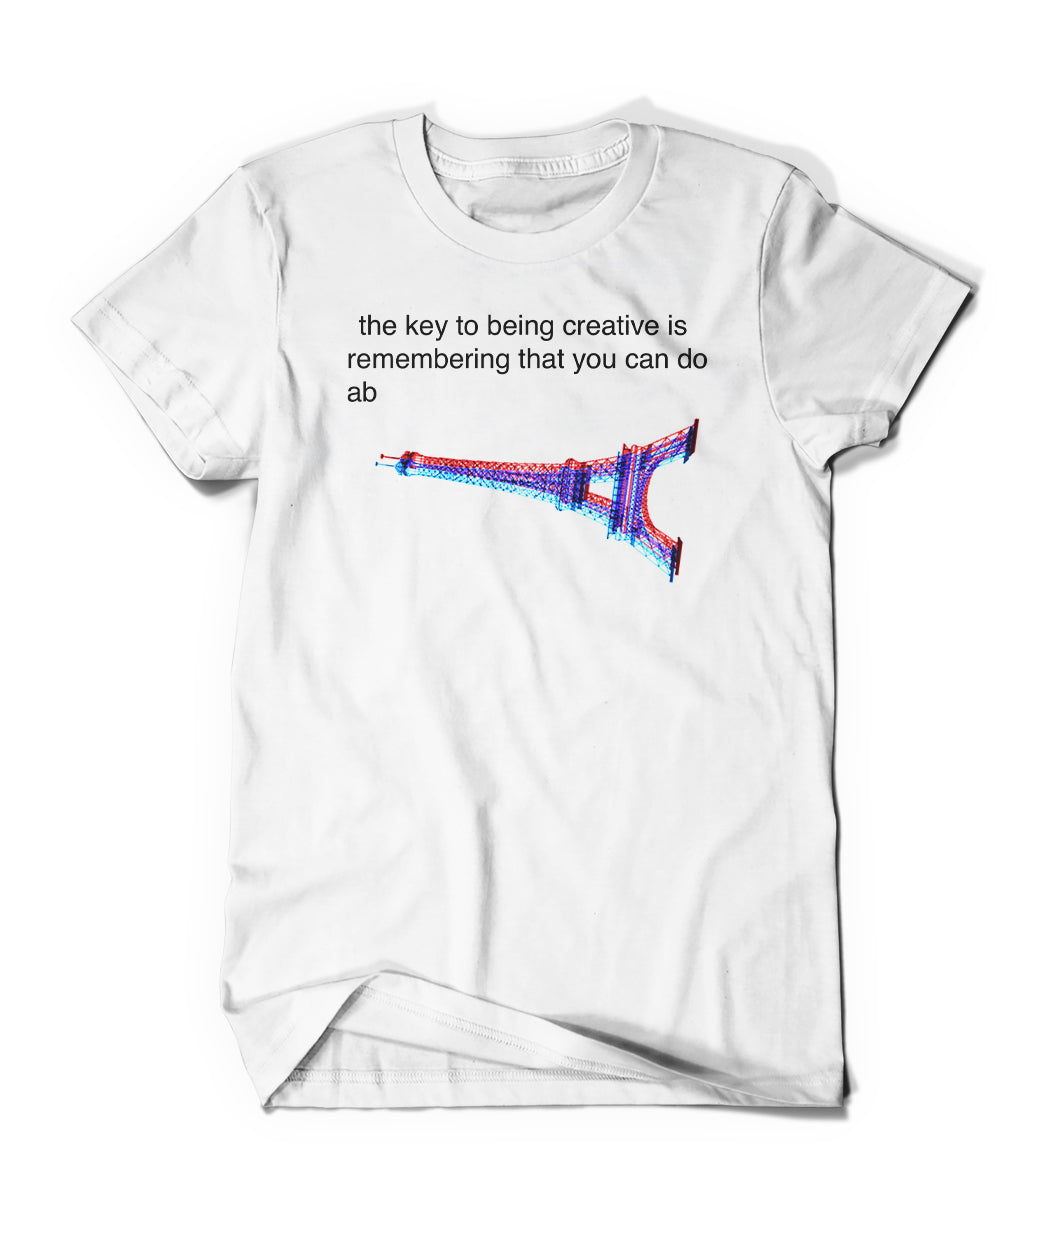 The front of white t-shirt with black lowercase text that reads "the key to being creative is remembering that you can do ab" and a sideways Eiffel tower below it. From Bill Wurtz. 